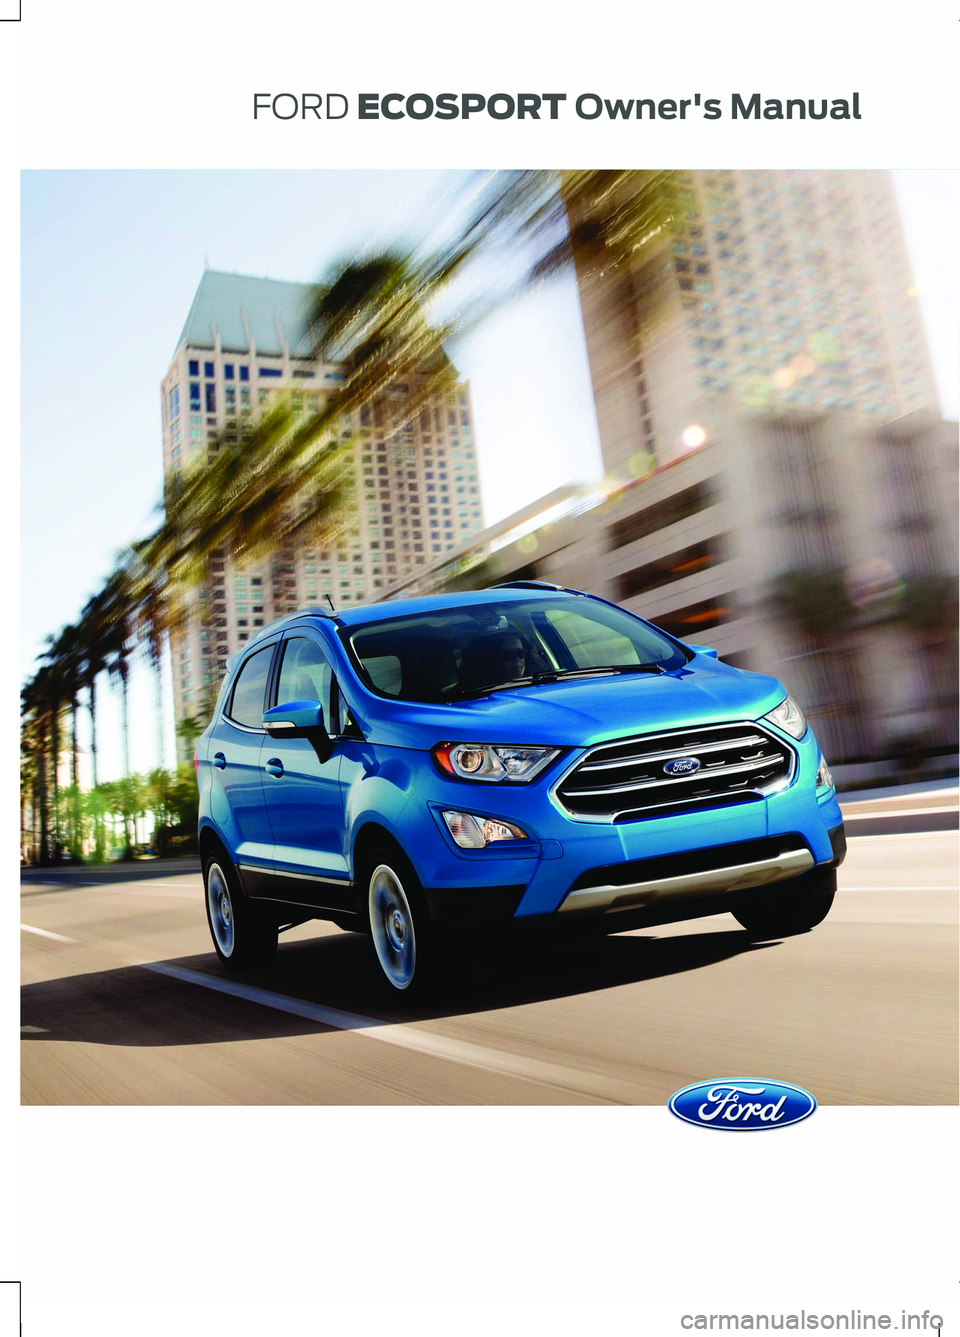 FORD ECOSPORT 2019  Owners Manual FORD ECOSPORTOwner's Manual 